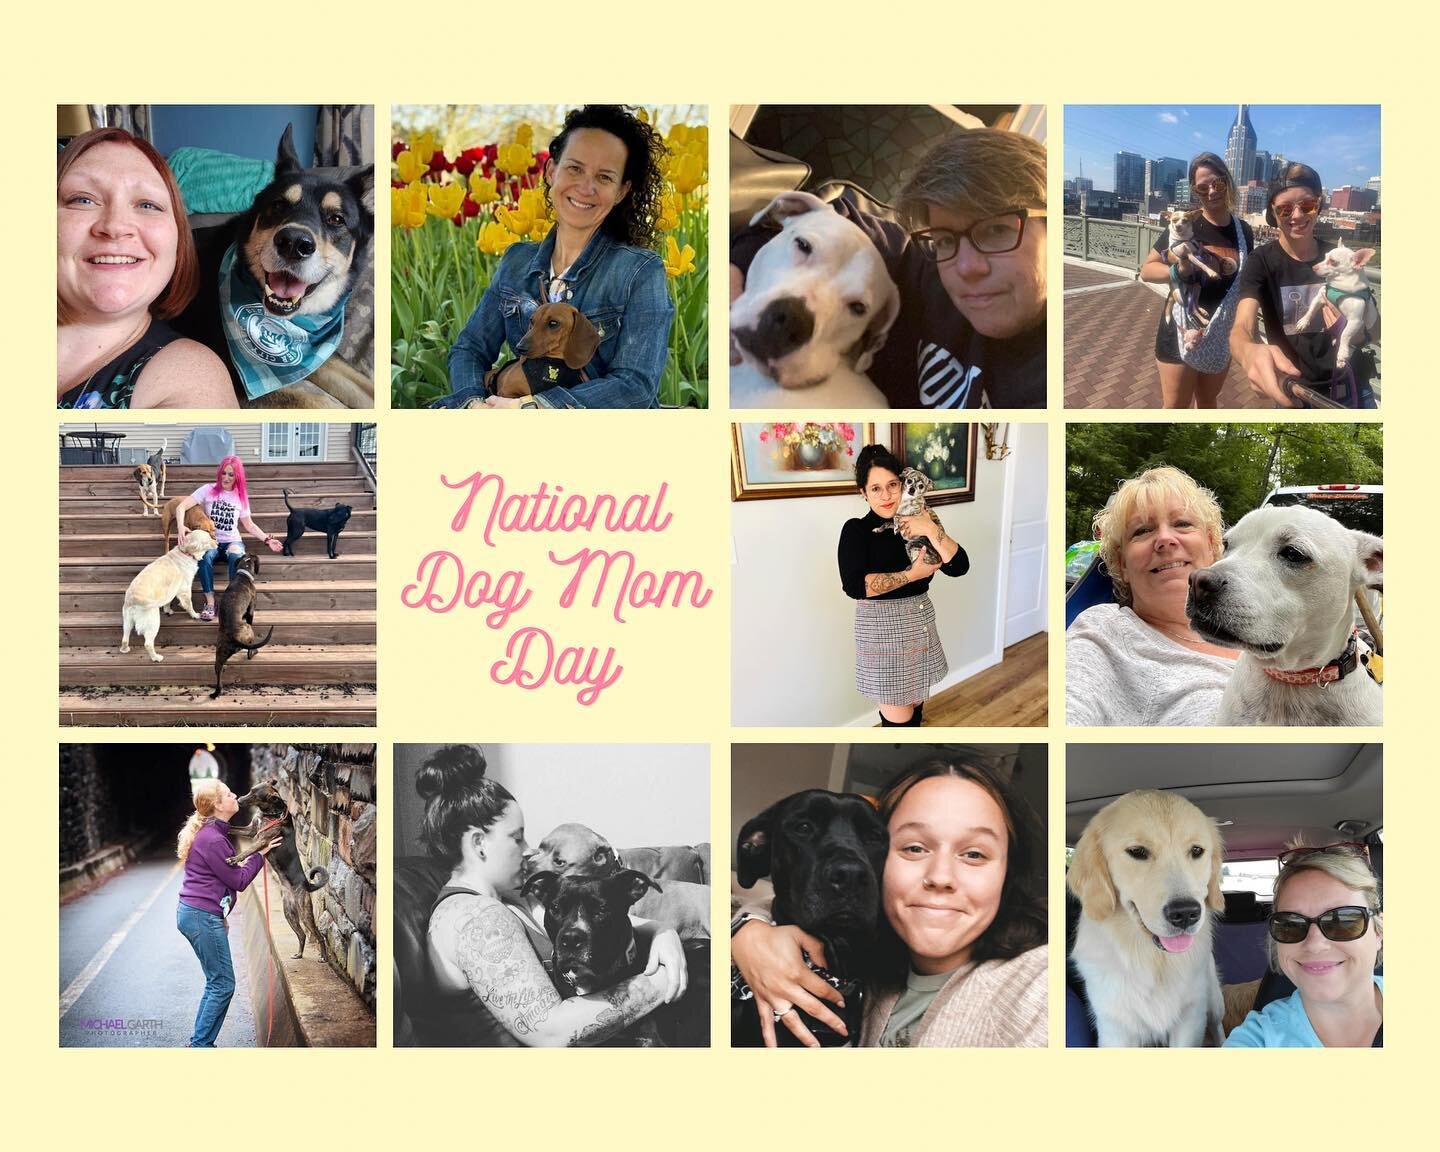 💐Happy National Dog Mom Day to all the dog mamas out there from most of our PHPFP dog mamas!💐 

#nationaldogmomday #adopt #petsarefamily #dogmama #volunteer